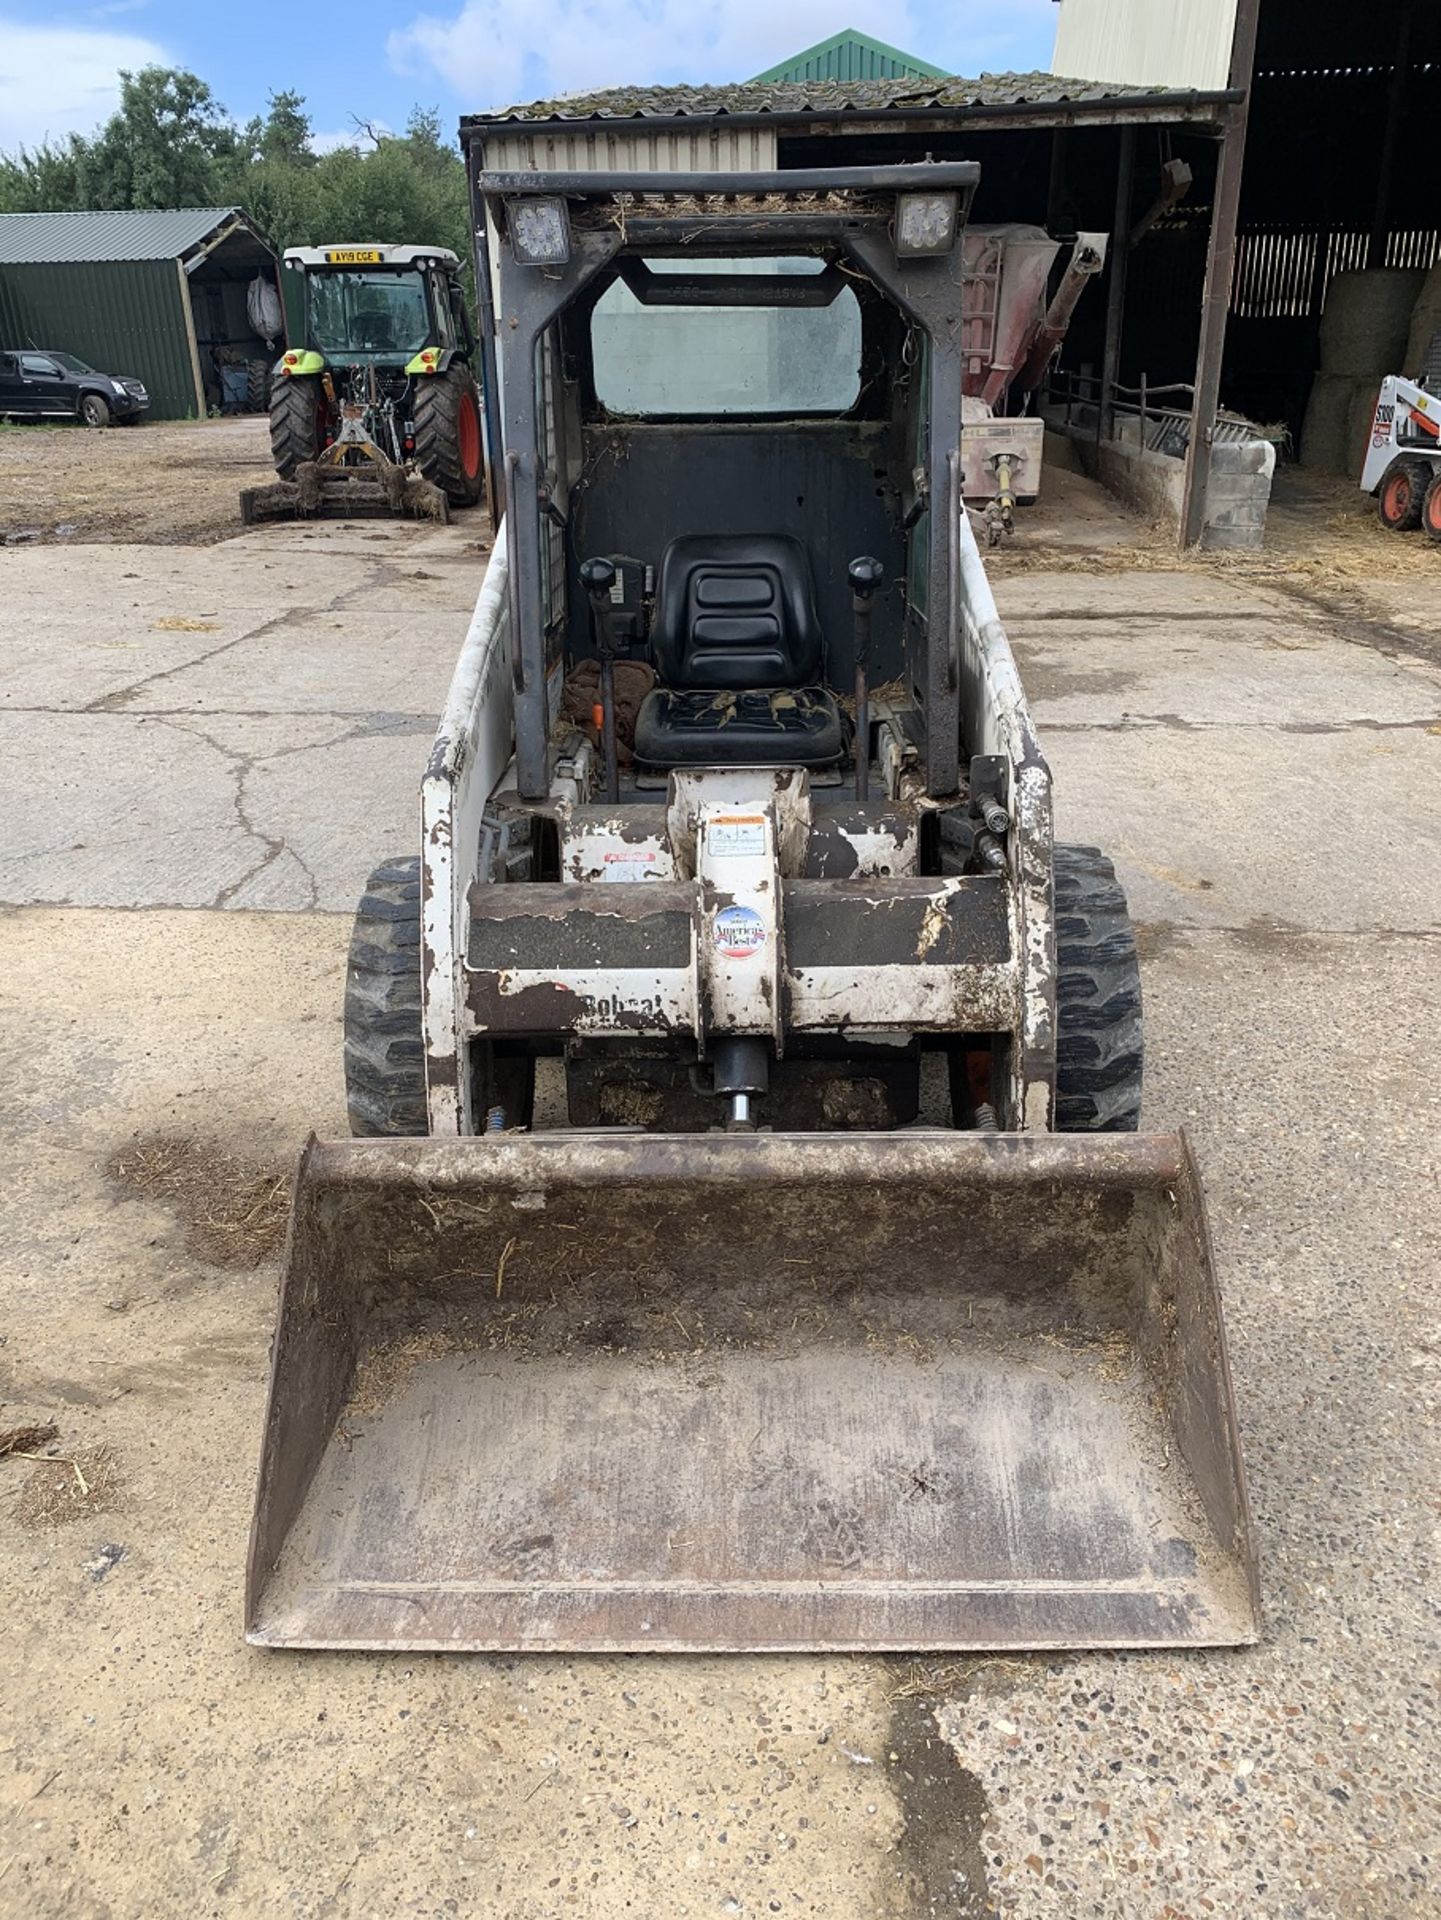 Bobcat 751 compact skid steer (1999) Rebuilt Engine in March 2020 Comes with Spare wheel, - Image 3 of 5